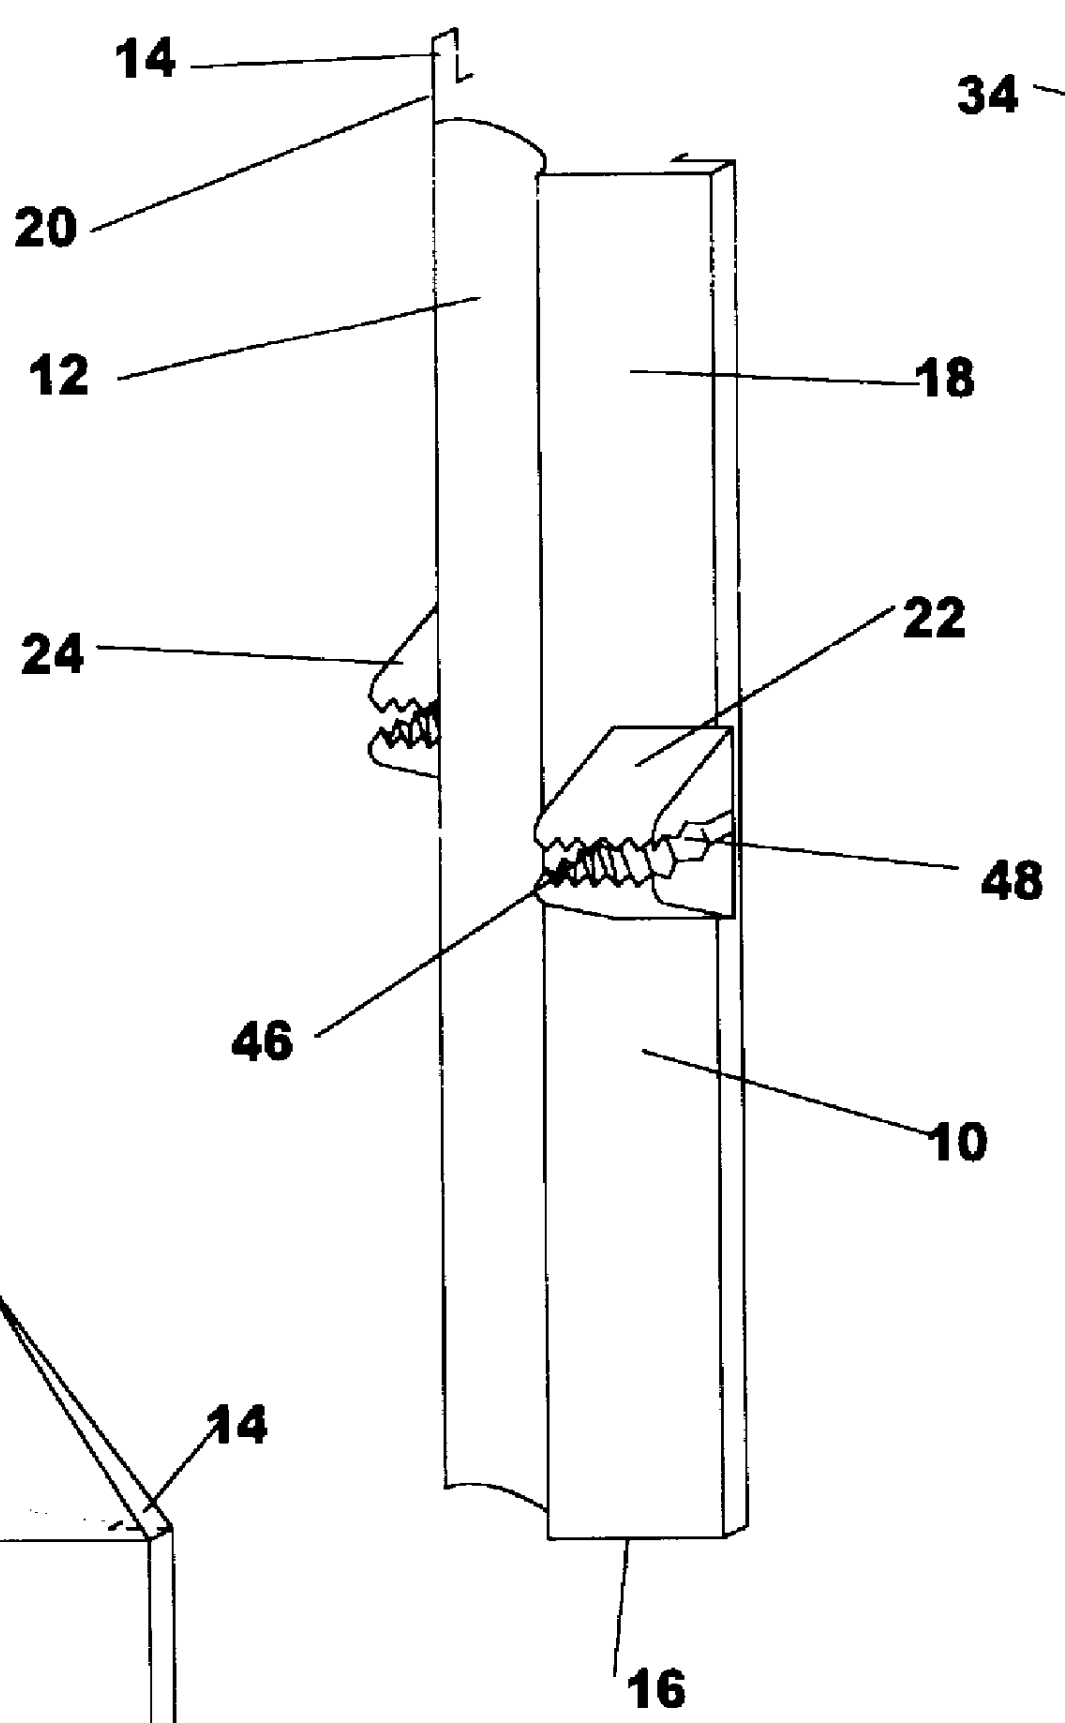 Bracket for attachment of optical devices and other support apparatuses to support objects